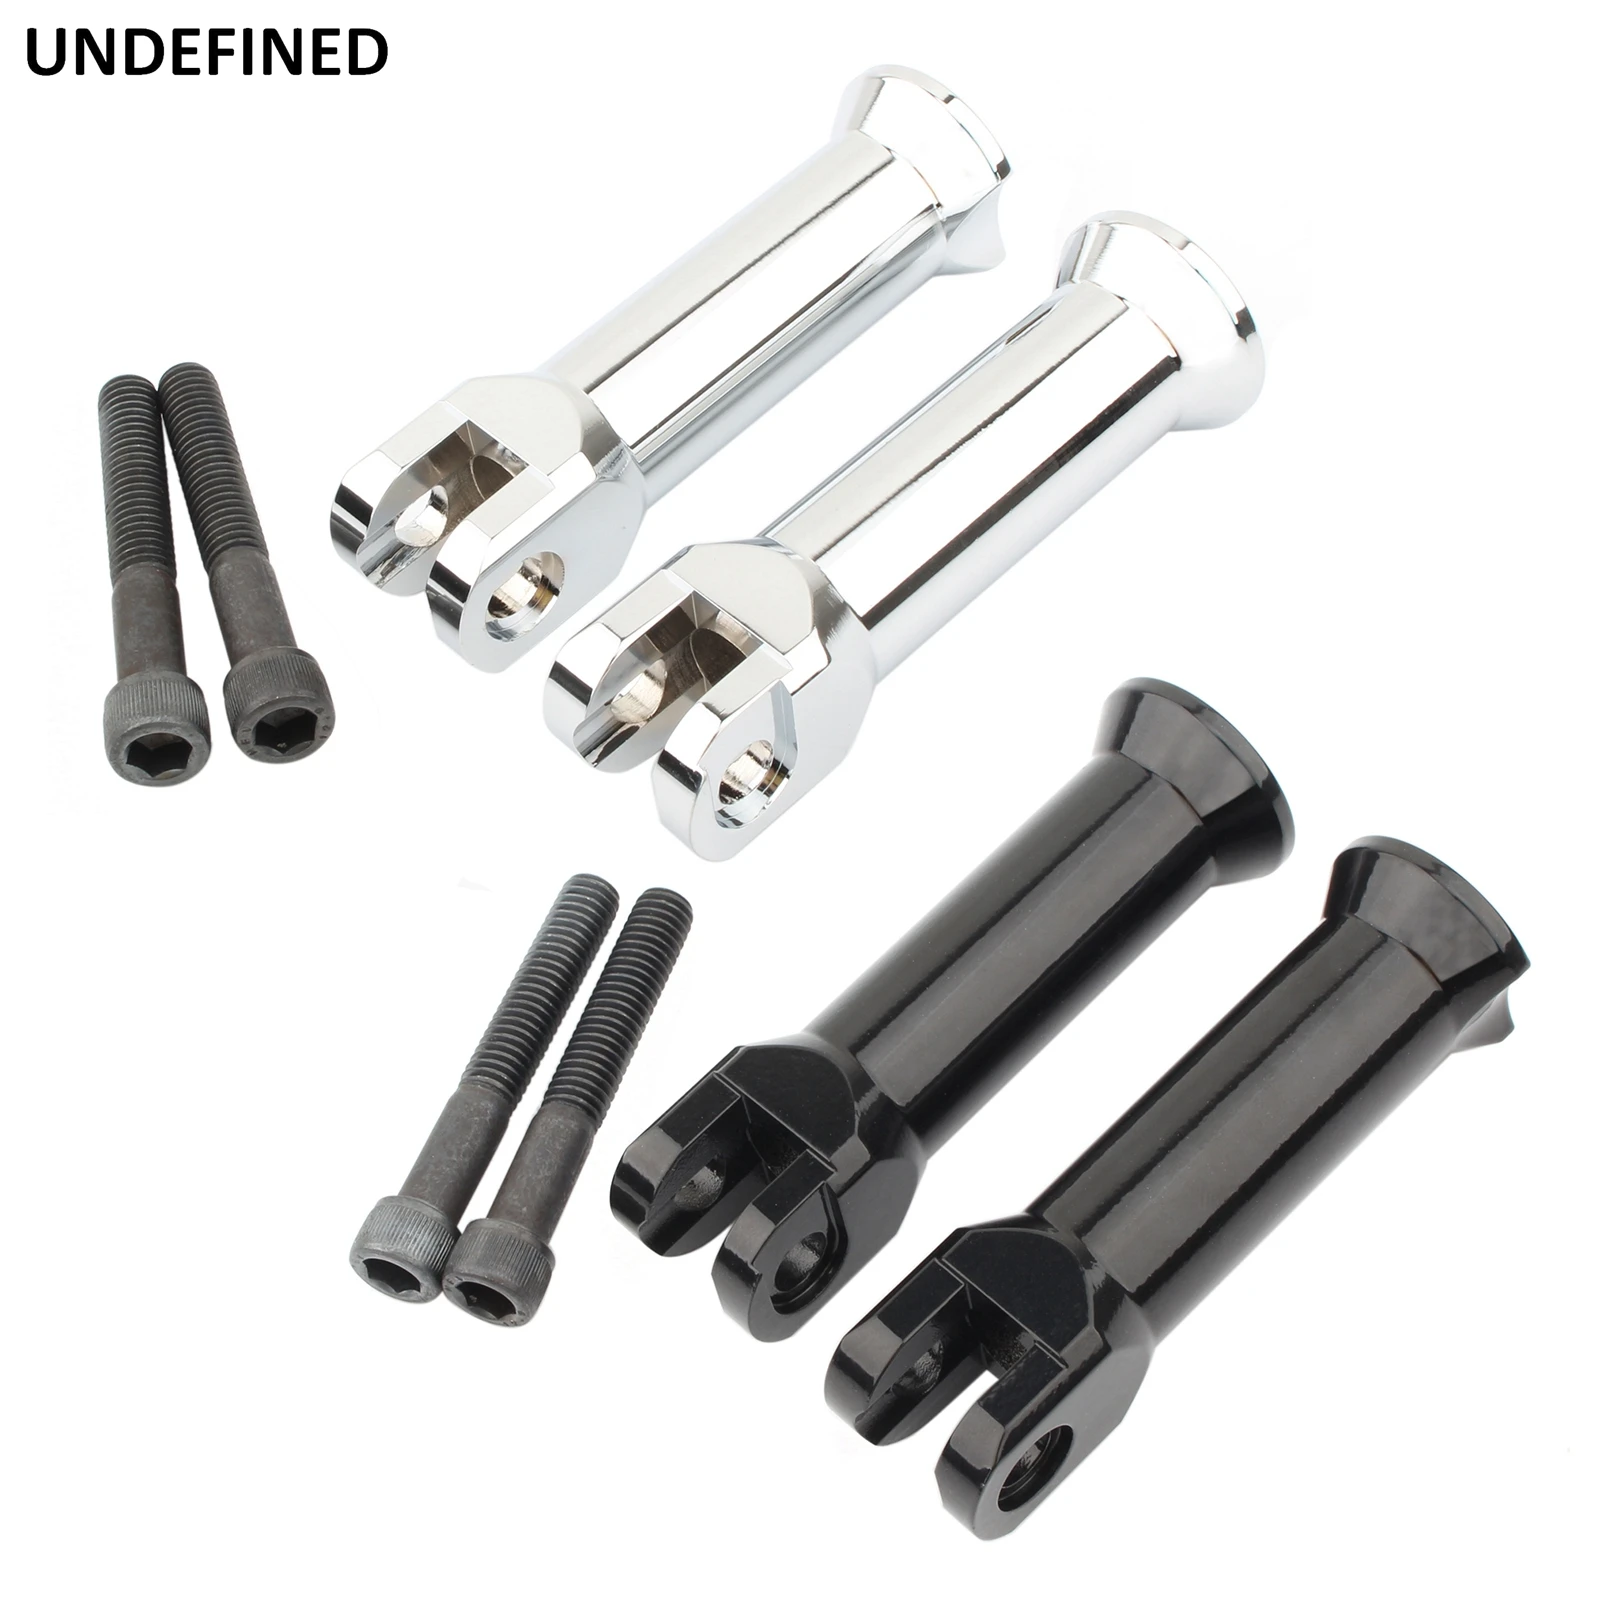 Motorcycle Foot Pegs Mount Bracket Passenger Footrest Clamp Clevis Kit For - $44.89